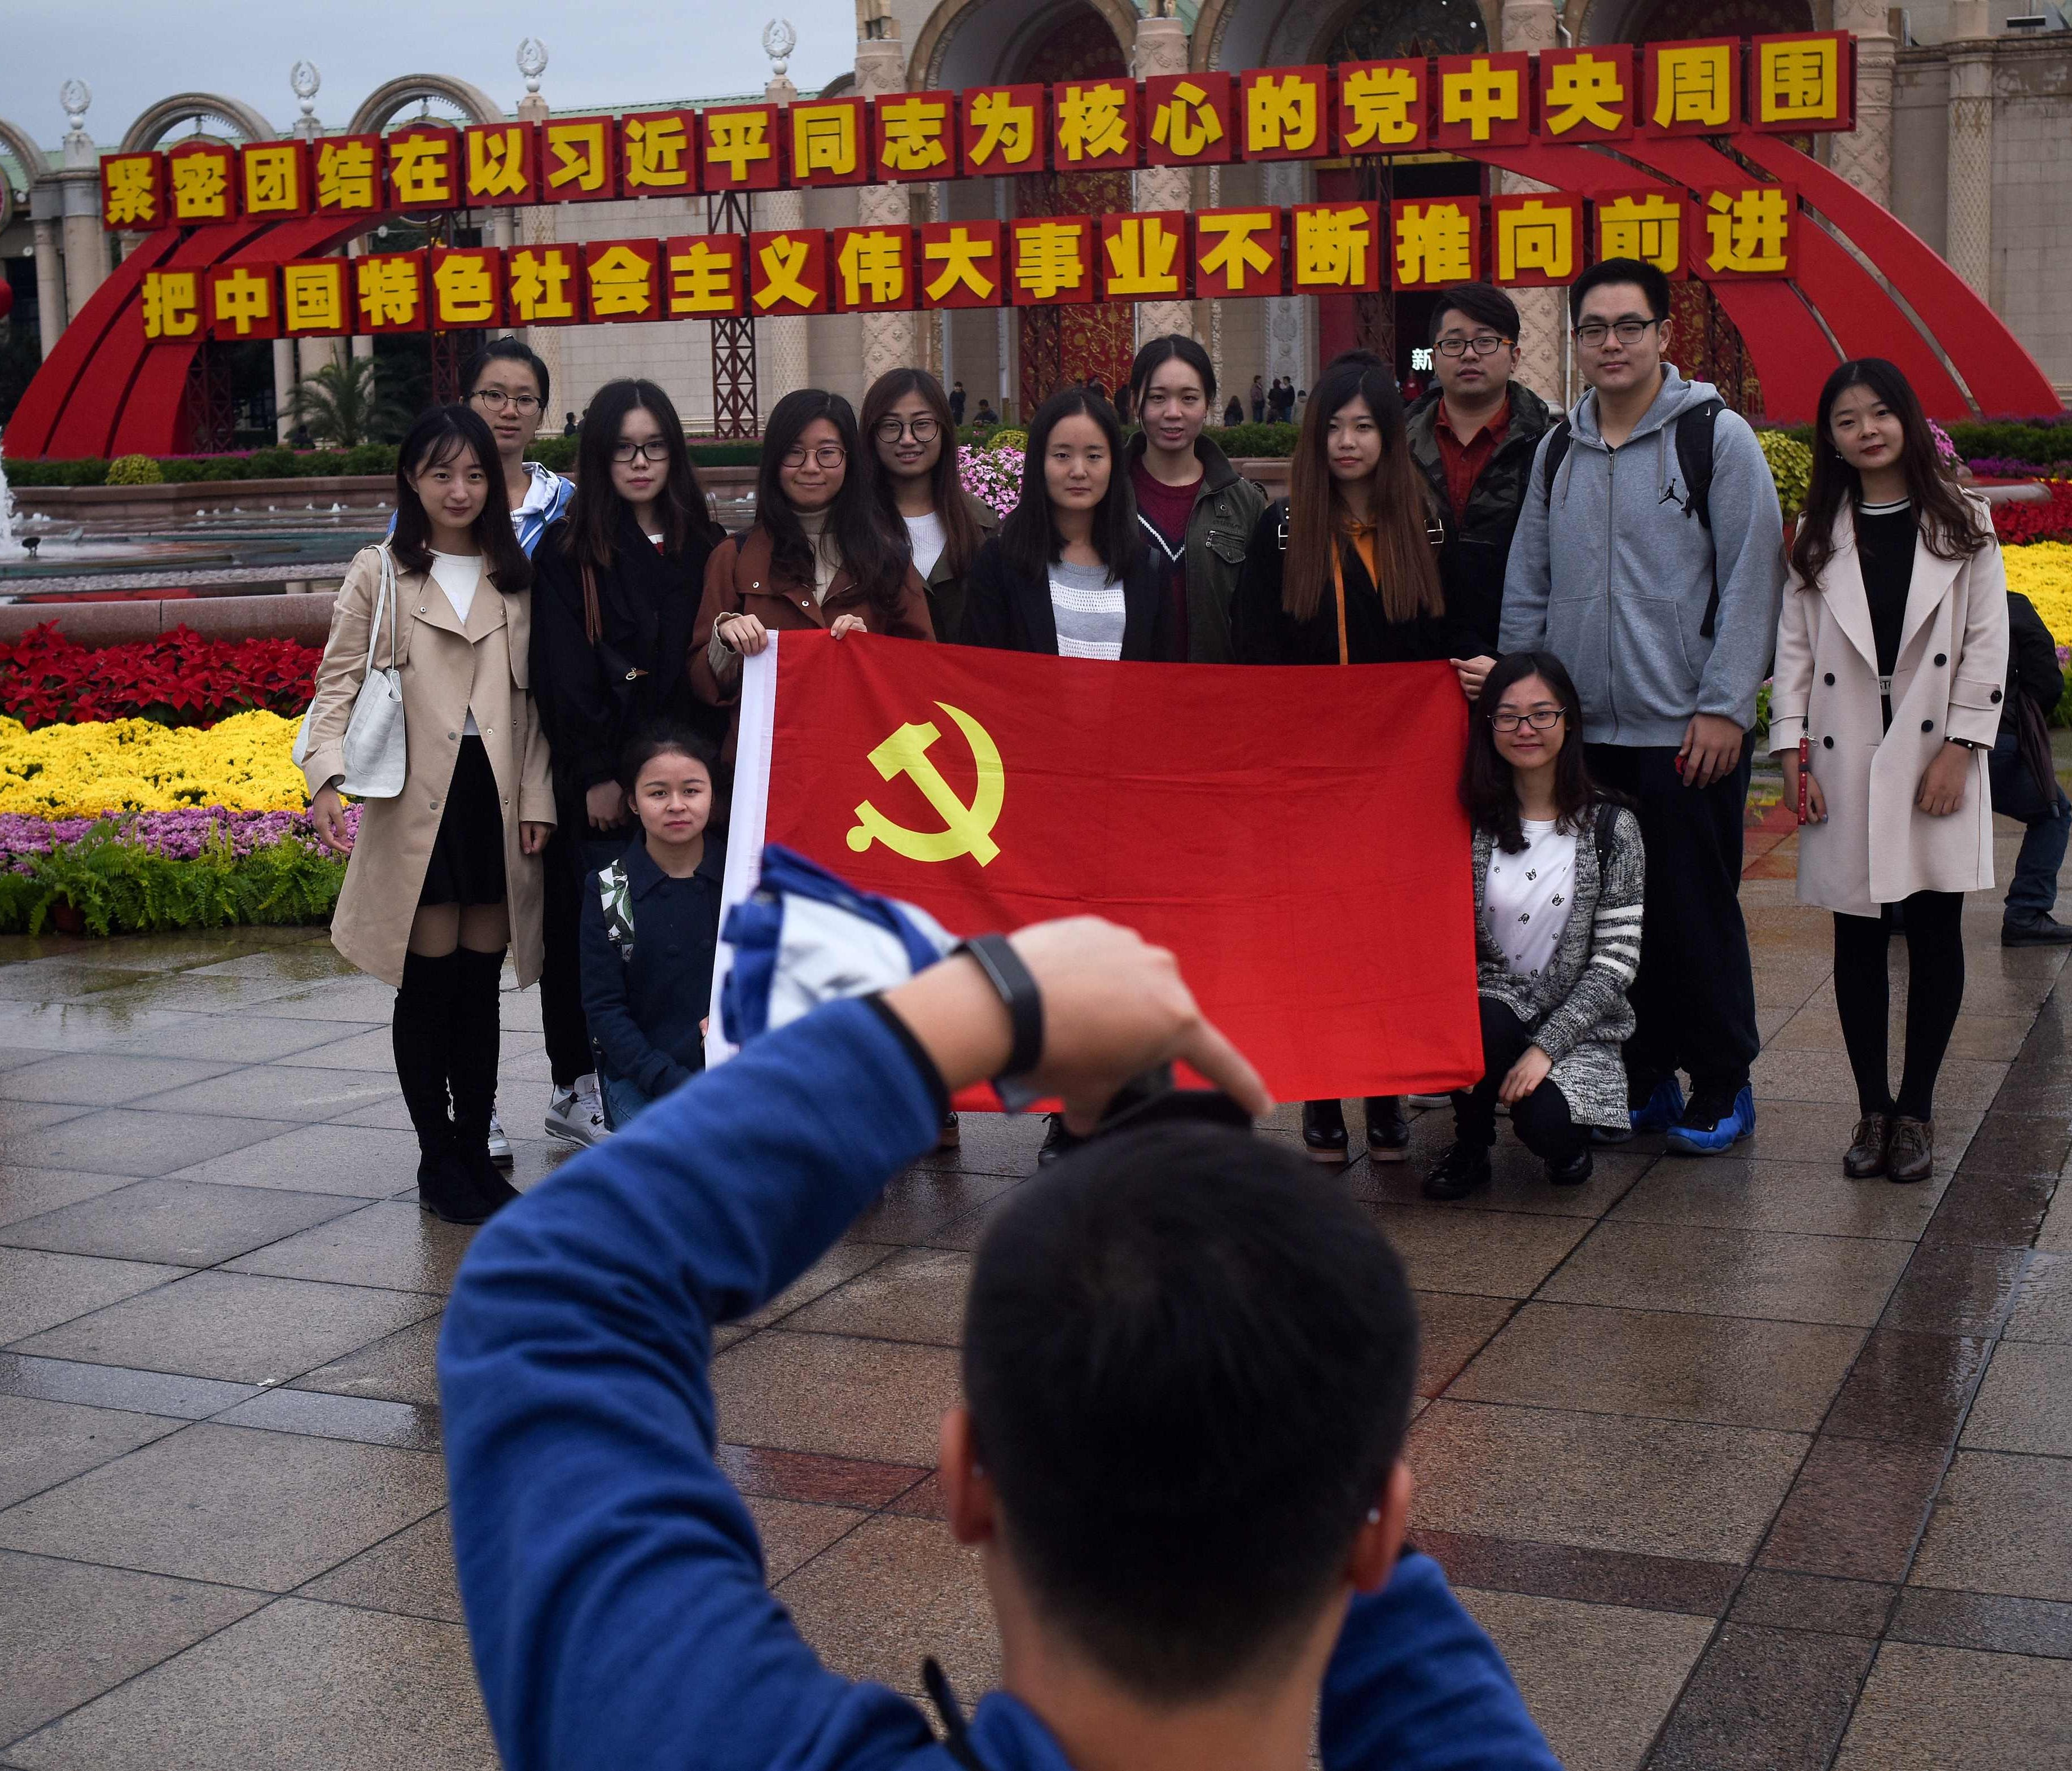 This picture taken on October 10, 2017 shows People take a group photo with a flag of the Chinese Communist Party during an exhibition showcasing China's progress in the past five years at the Beijing Exhibition Center, on Oct. 10, 2017.